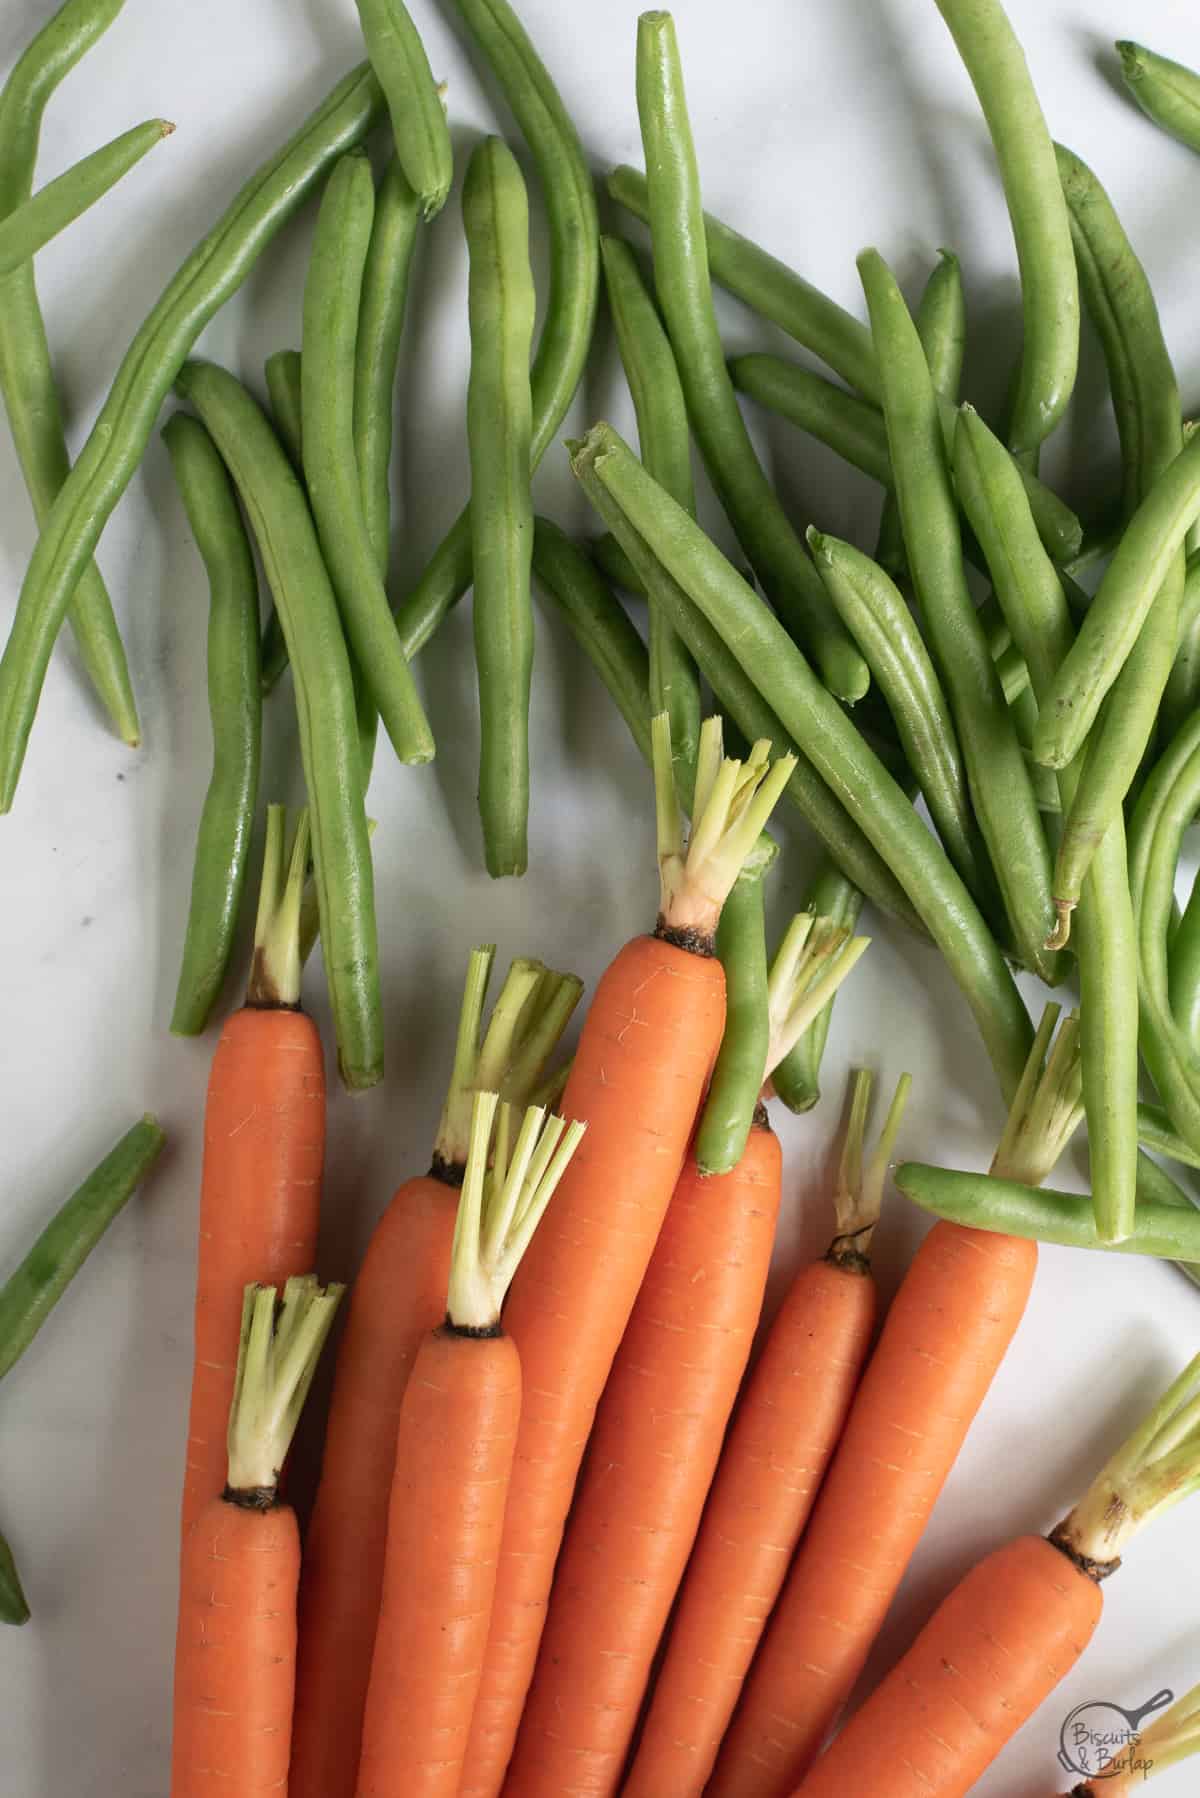 raw, fresh green beans and carrots.